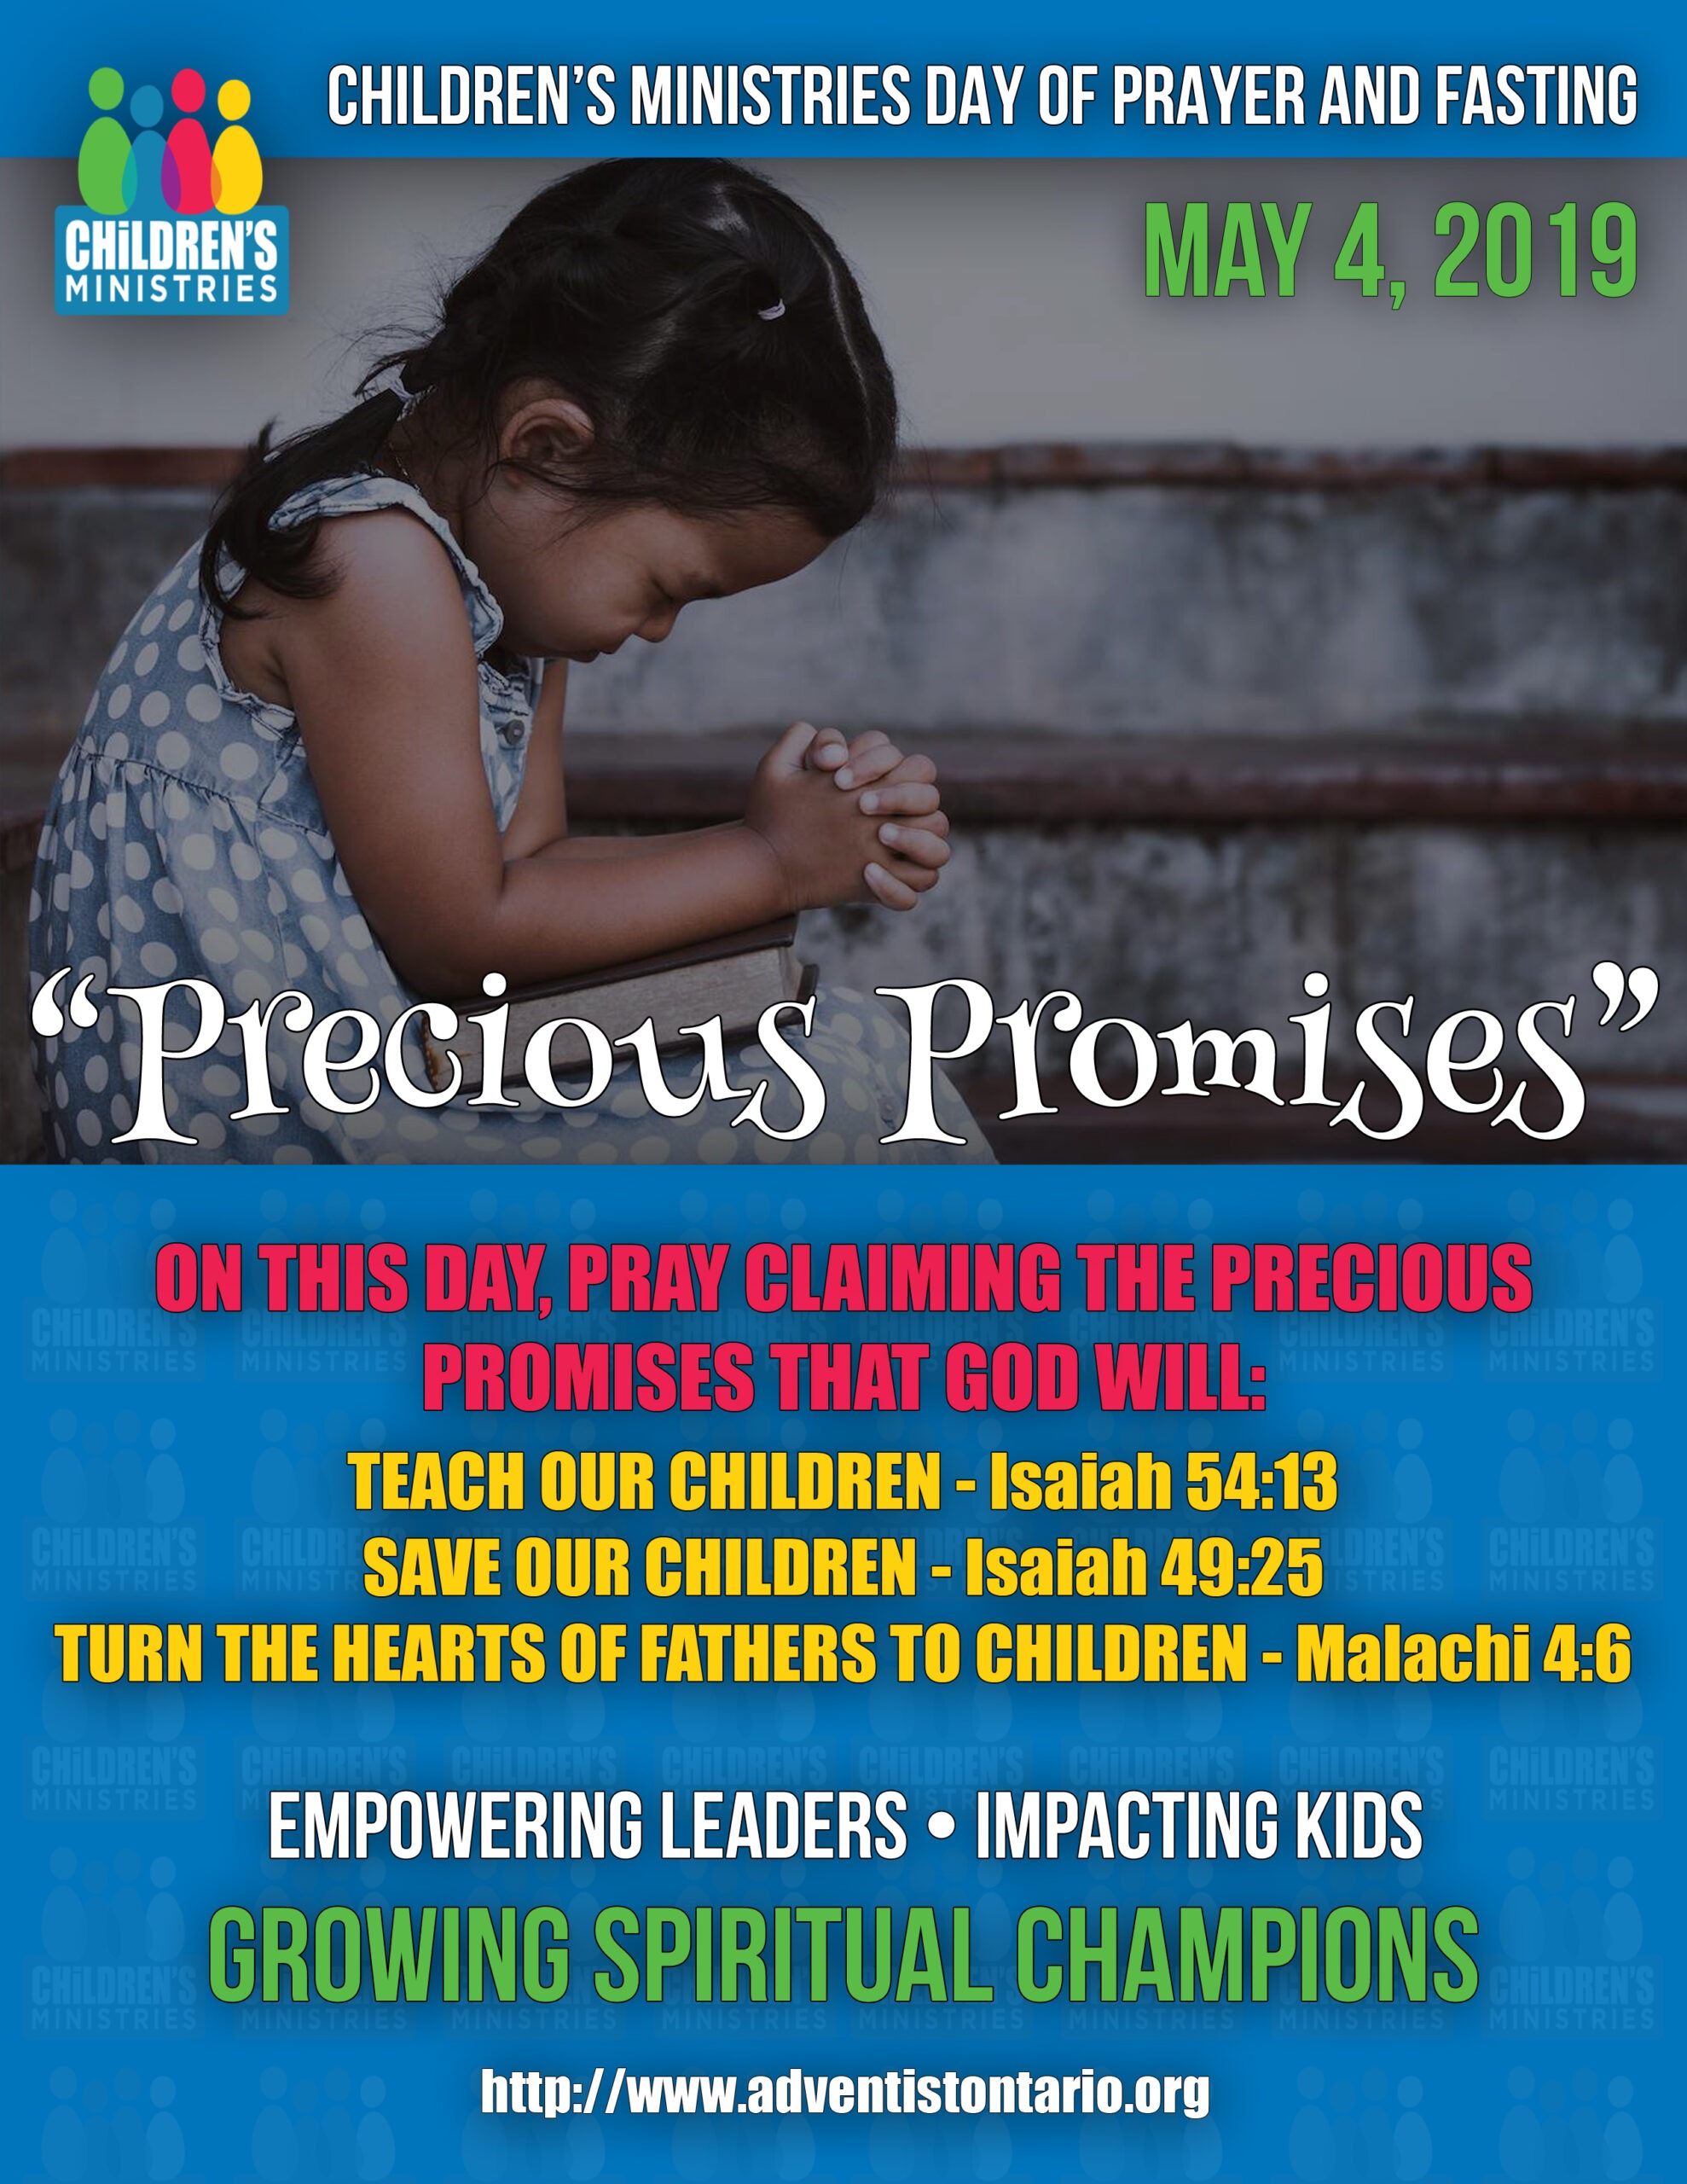 Children's Ministries Day of Prayer and Fasting 2019